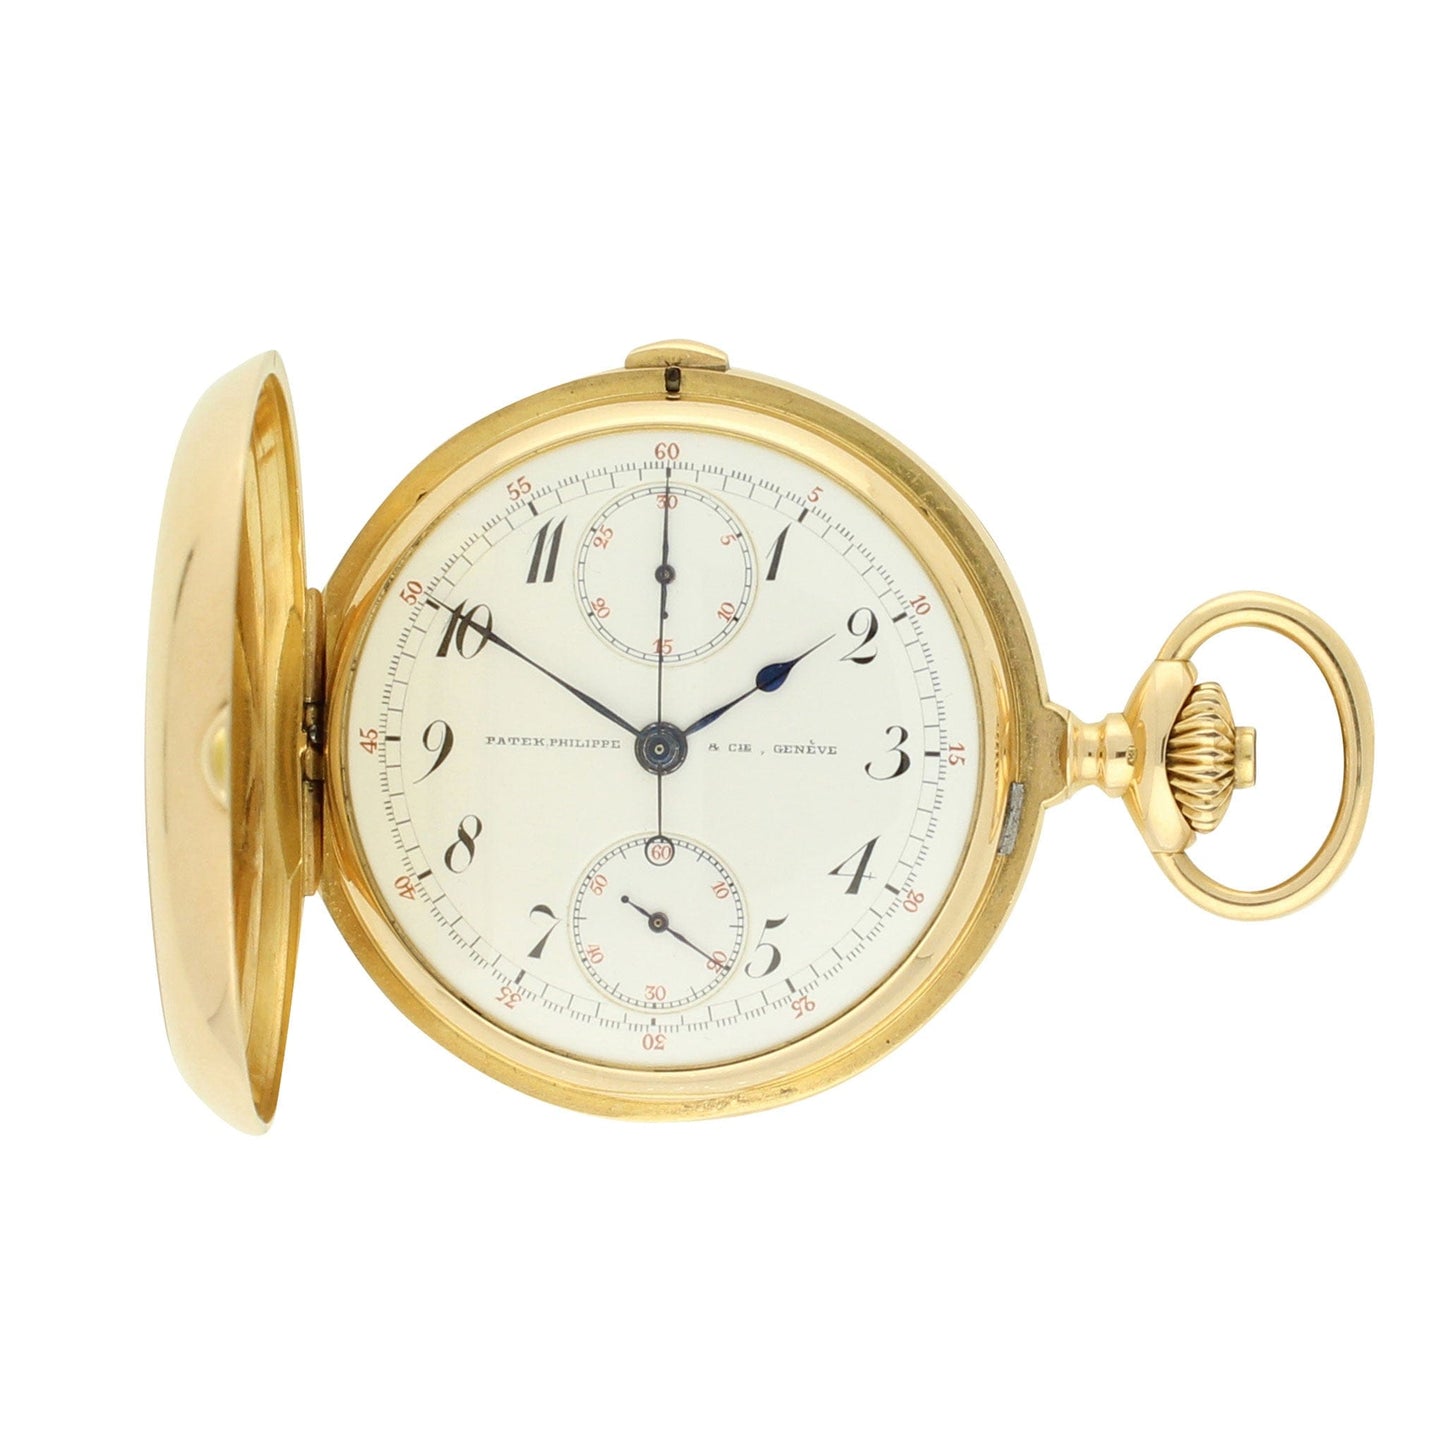 18ct rose gold hunter case chronograph pocket watch. Made 1897